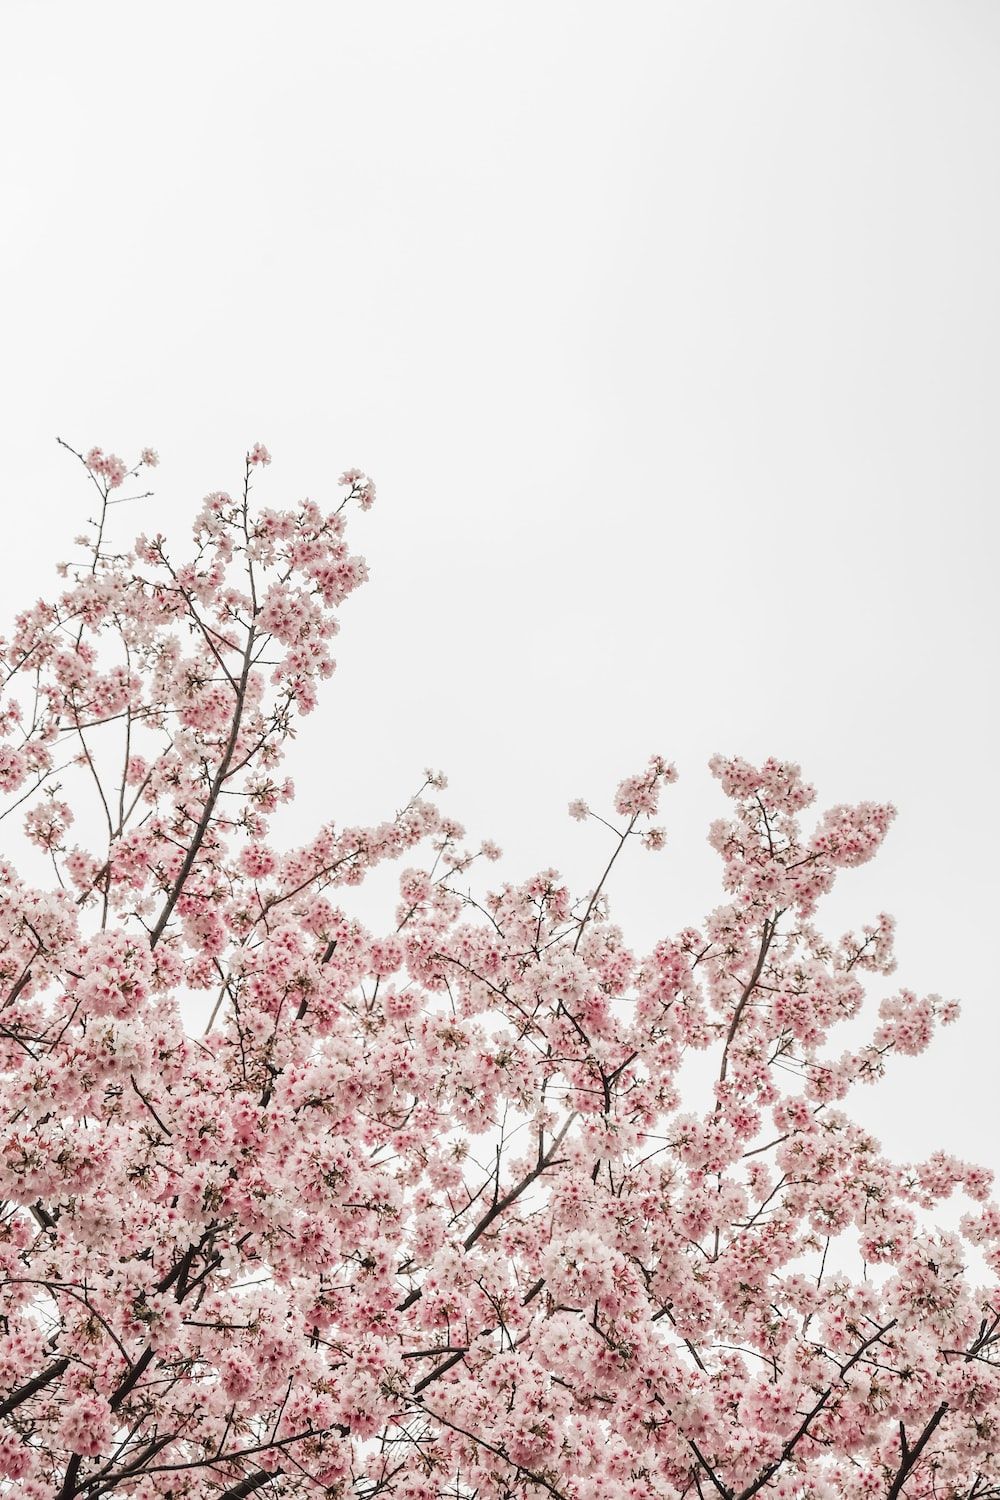 A pink flowered tree with a white sky in the background - Blush